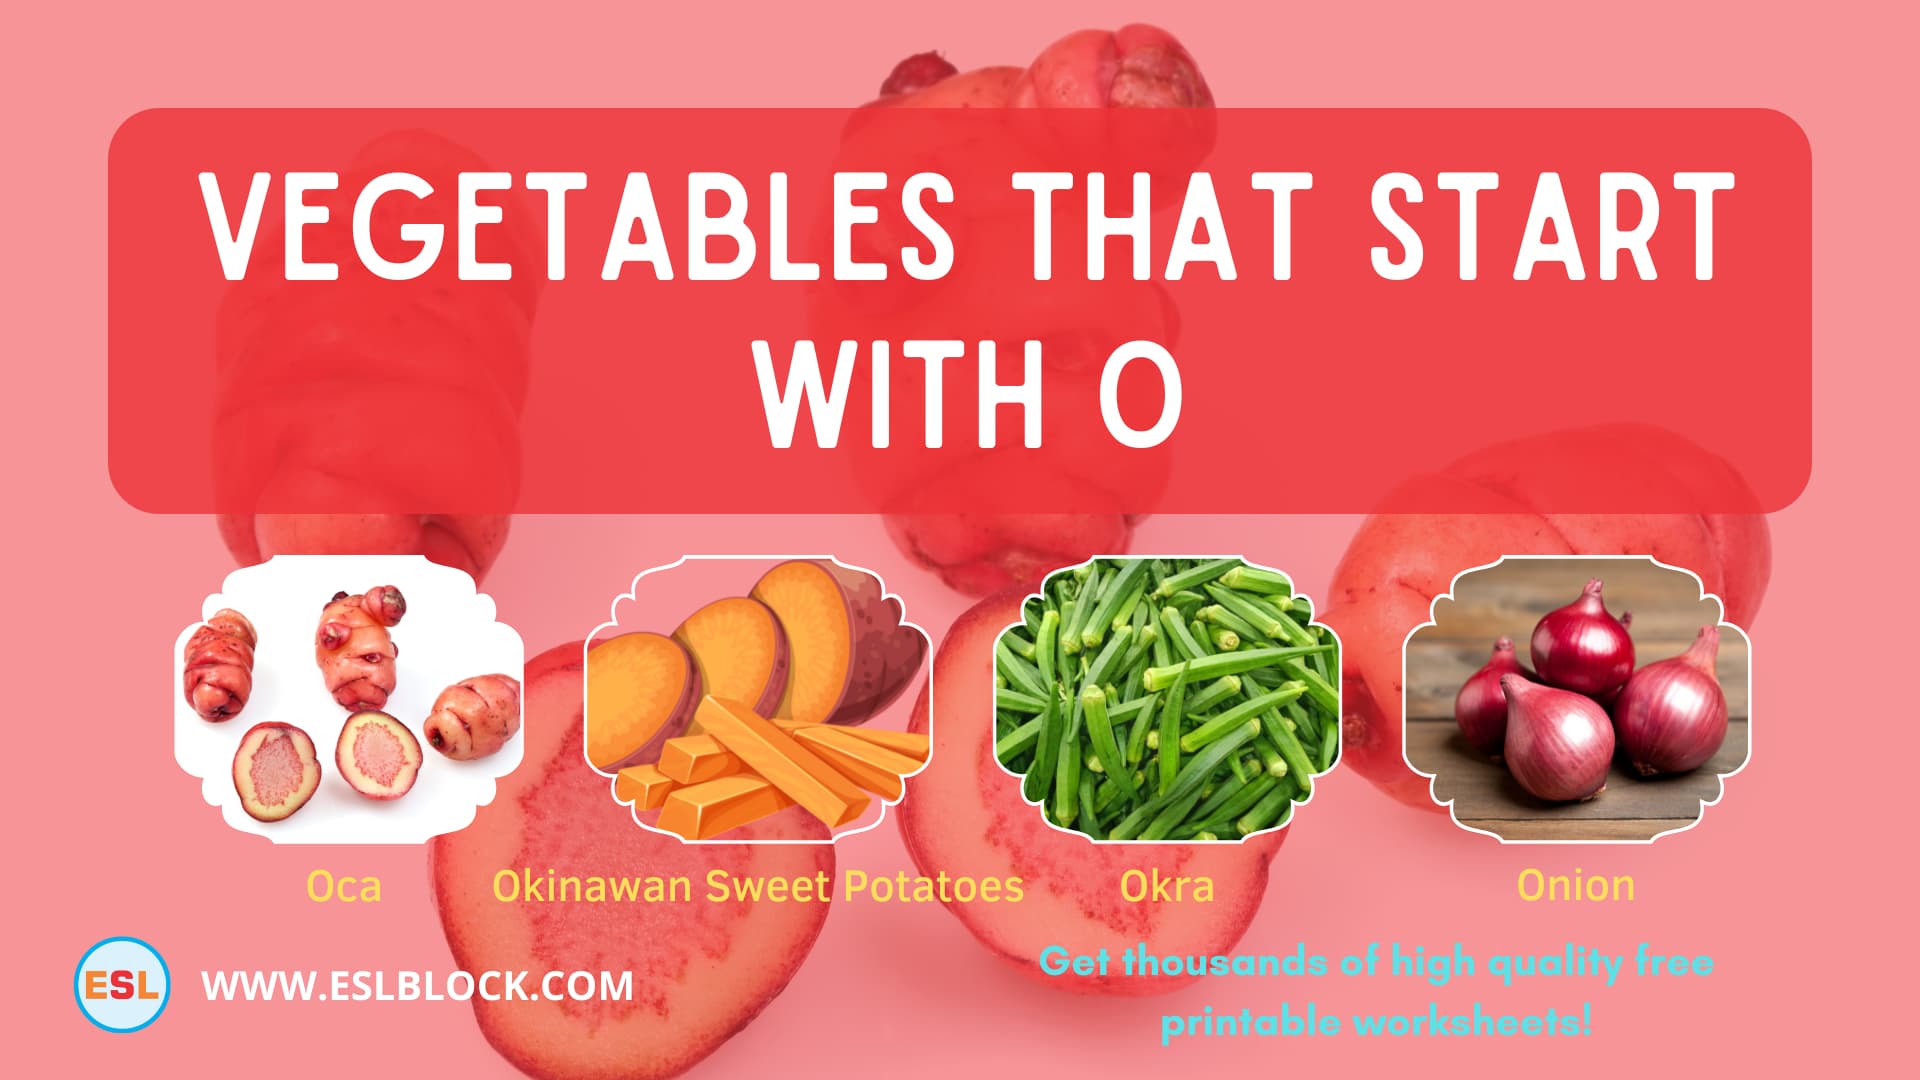 5 Letter Vegetables Starting With O, English, English Nouns, English Vocabulary, English Words, List of Vegetables That Start With O, Nouns, O Vegetables, O Vegetables in English, O Vegetables Names, Vegetables List, Vegetables Names, Vegetables That Begins With O, Vegetables That Start With O, Vocabulary